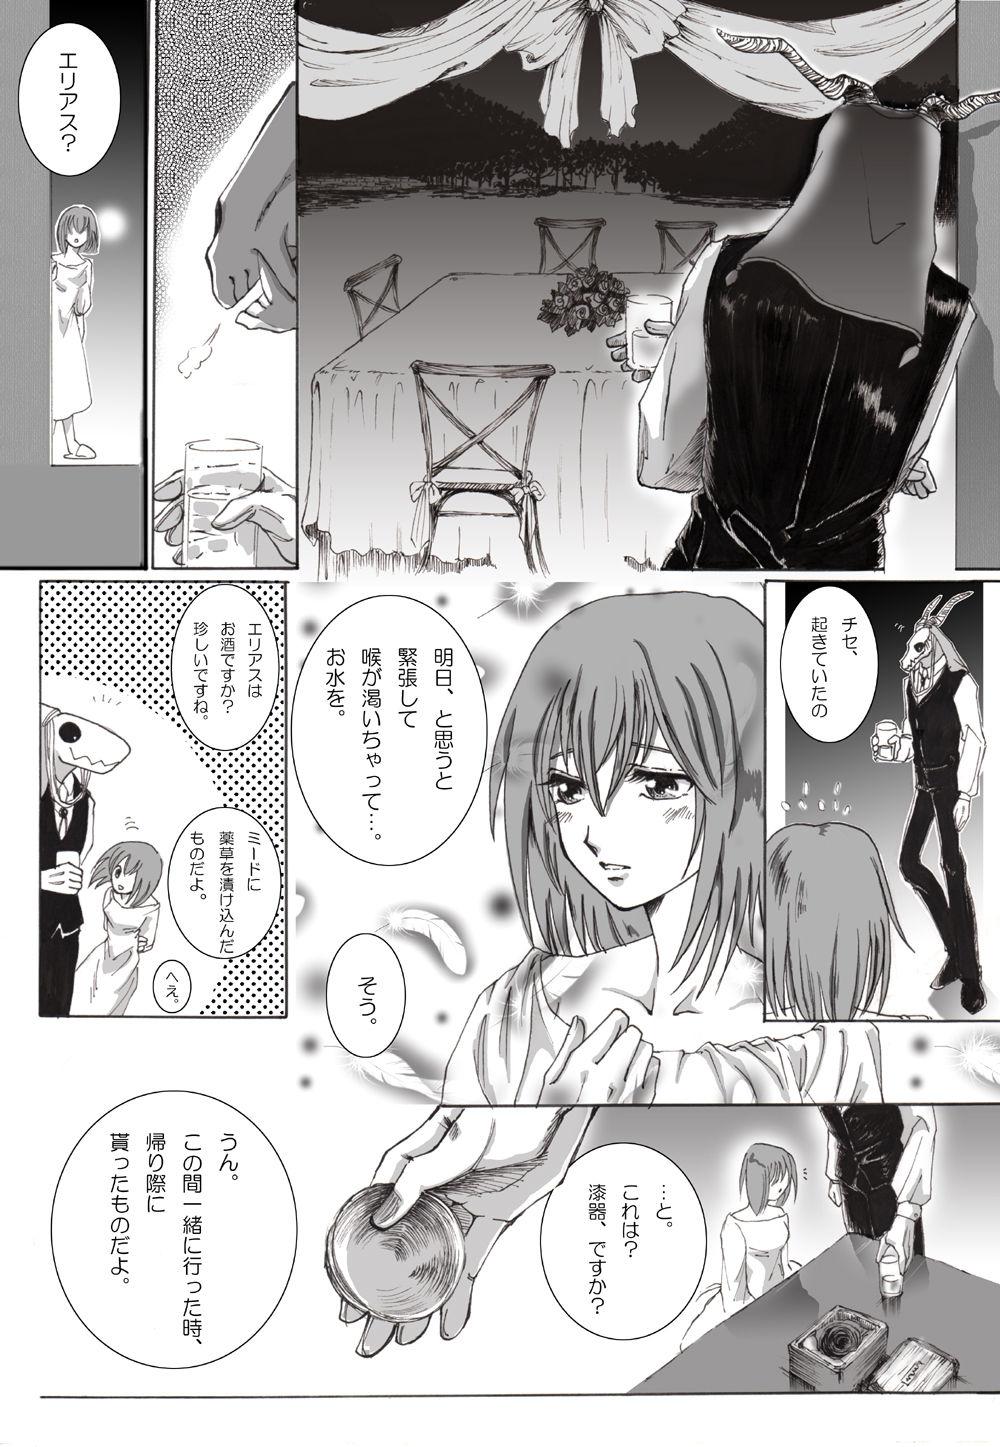 Stockings Nectar and his robbin are... - Mahoutsukai no yome Internal - Picture 1